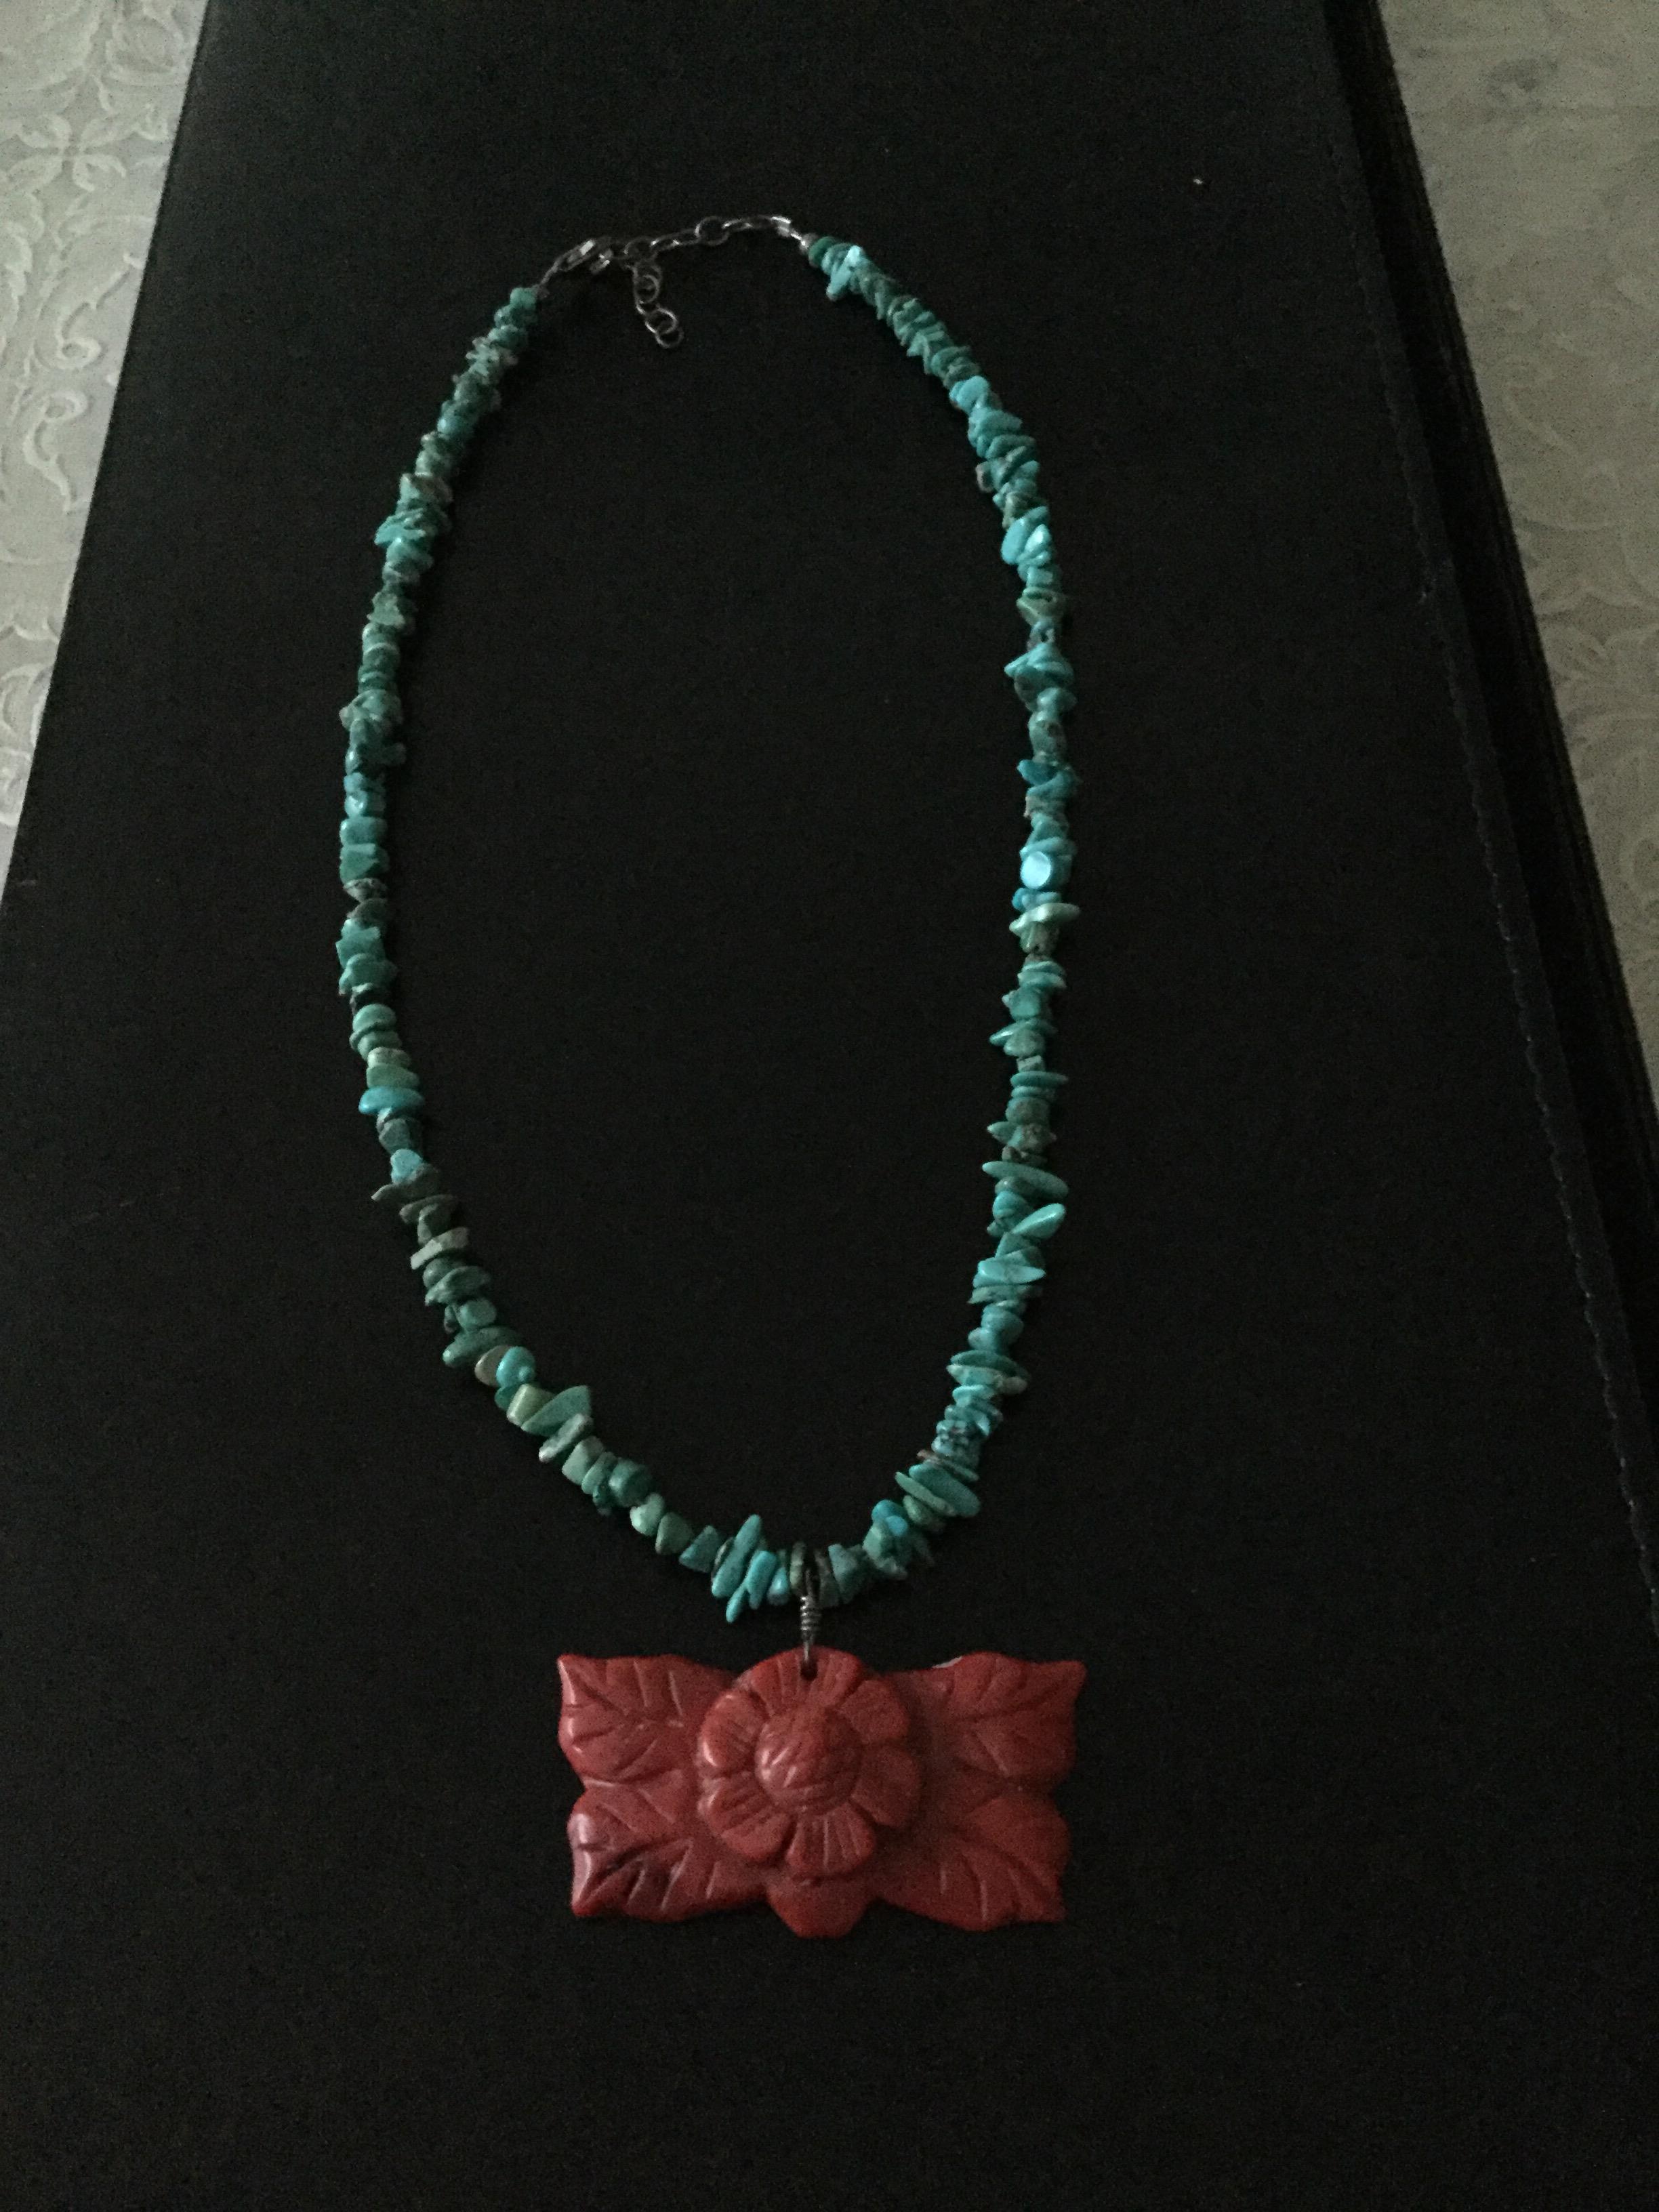 Turquoise and Coral Necklace - Image 4 of 6